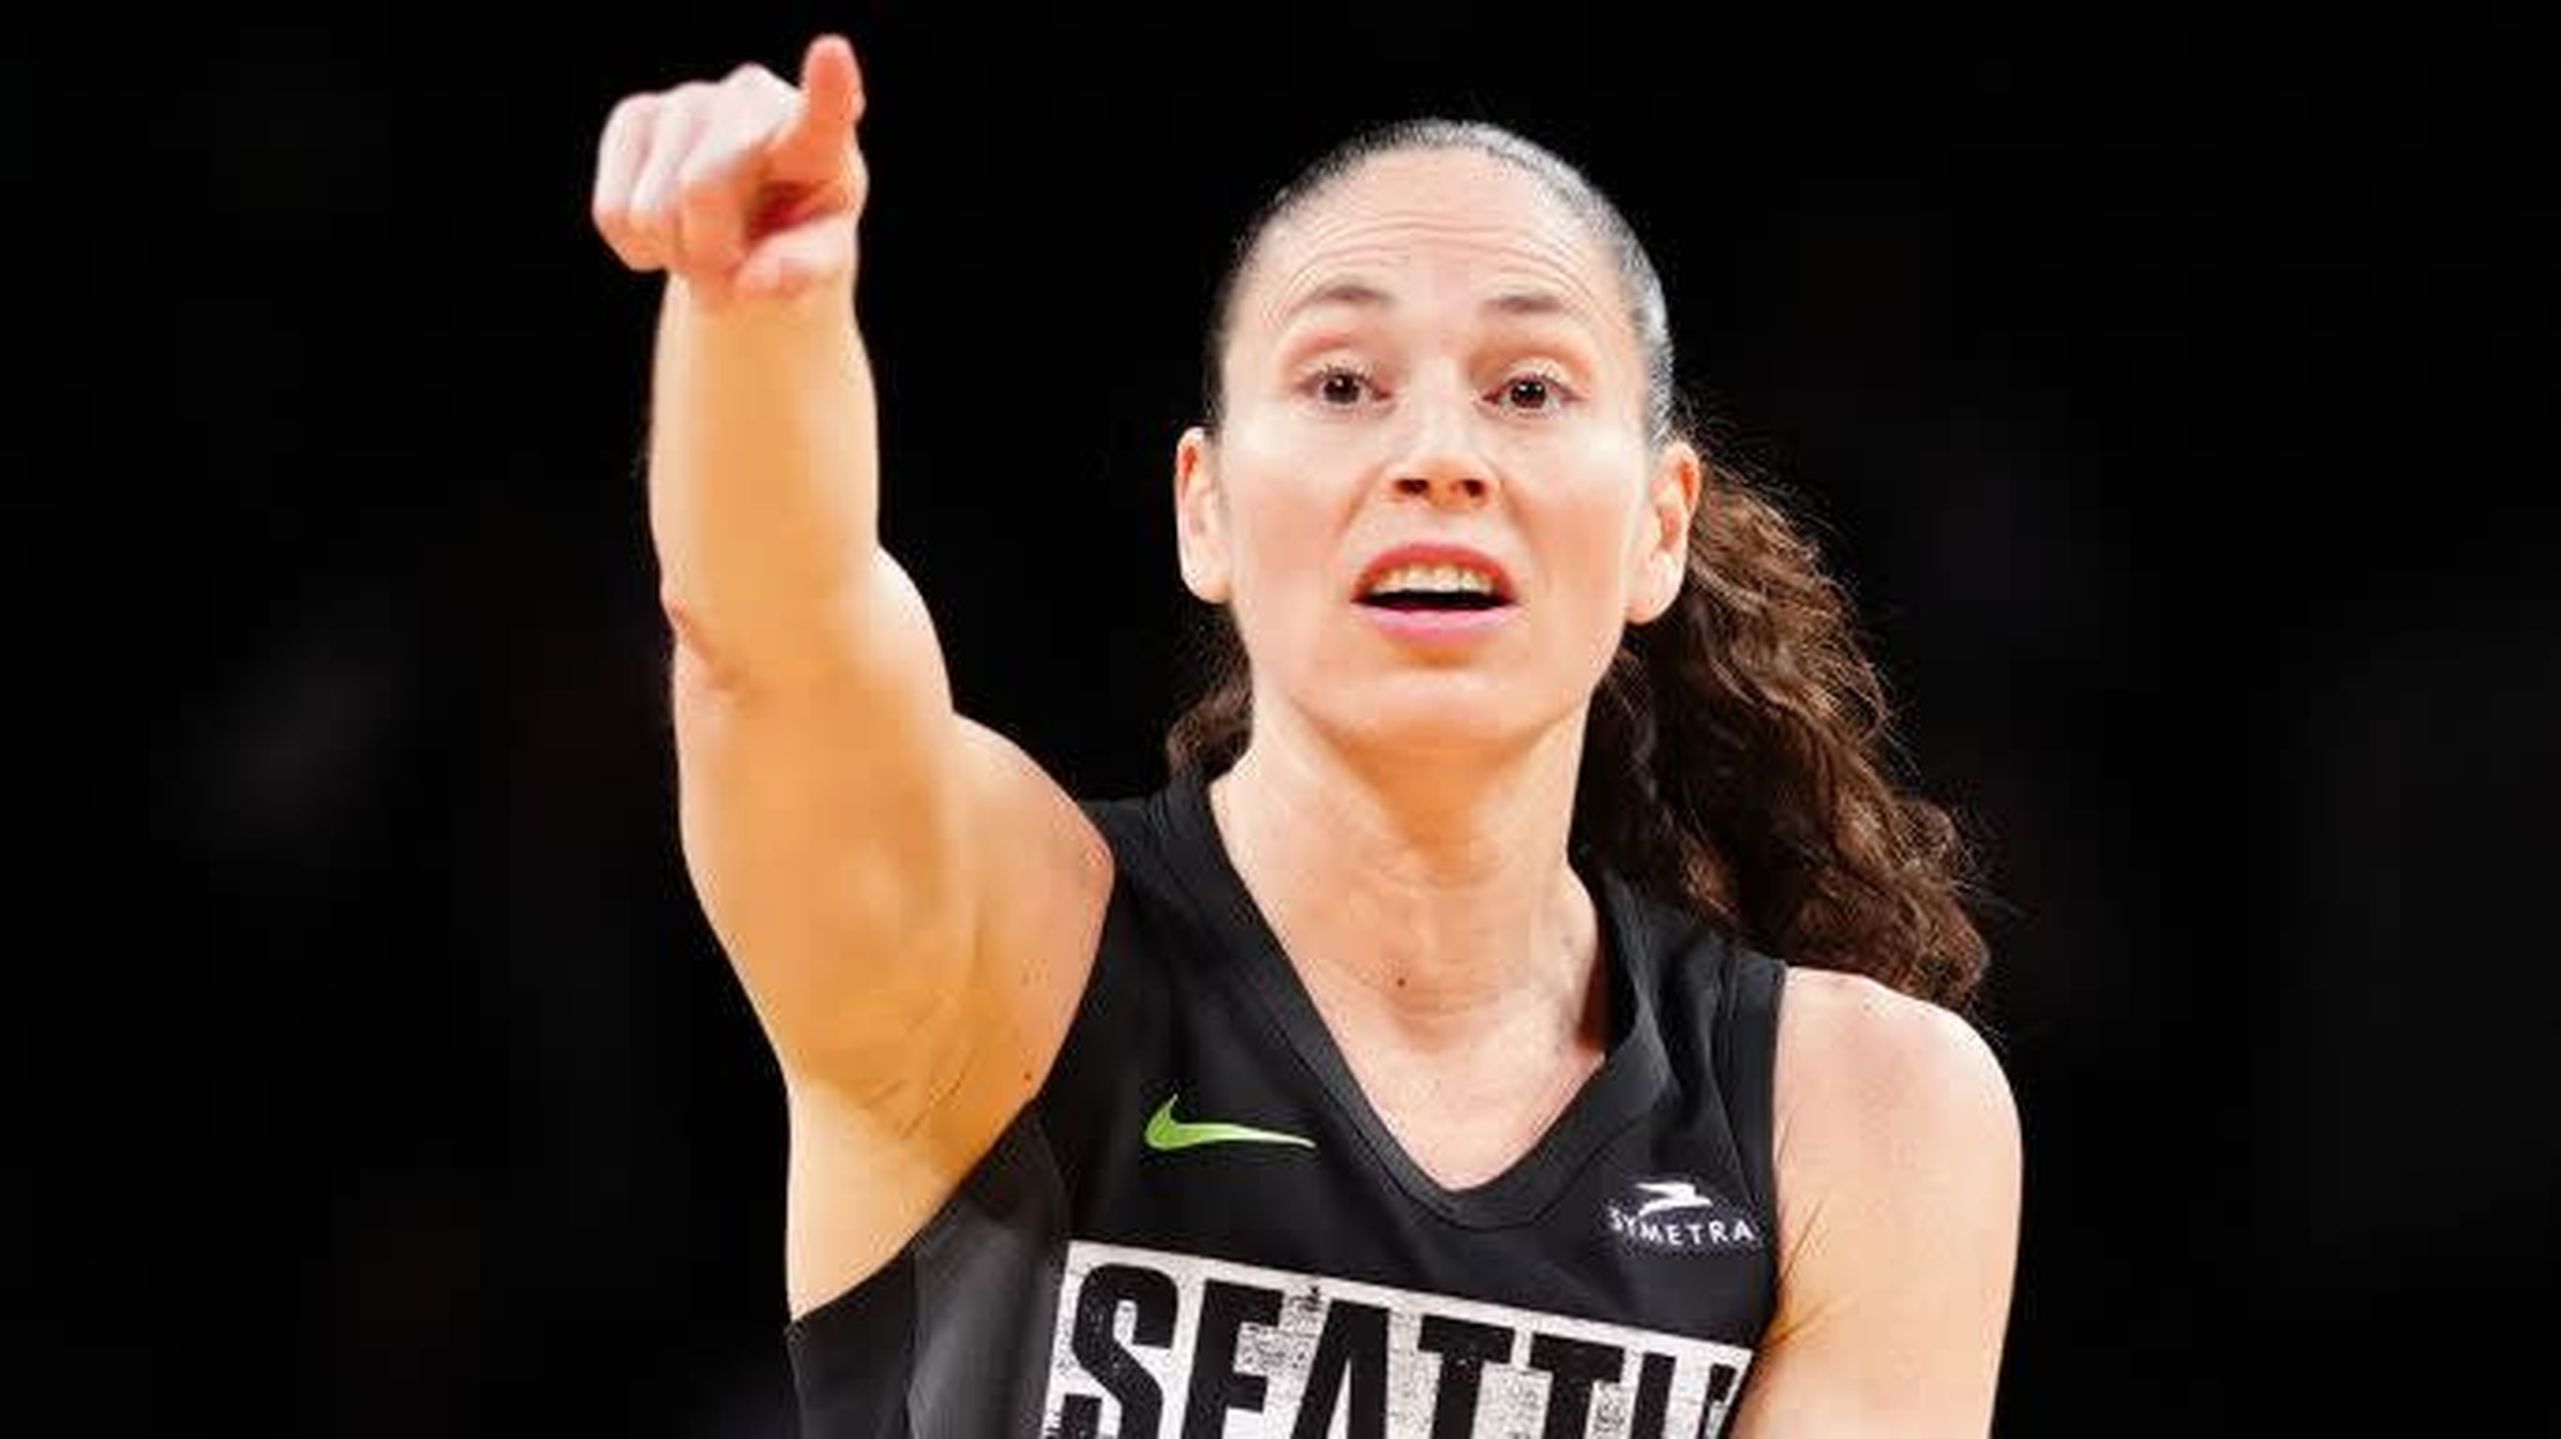 New York local Sue Bird plays a profound last game in the city and